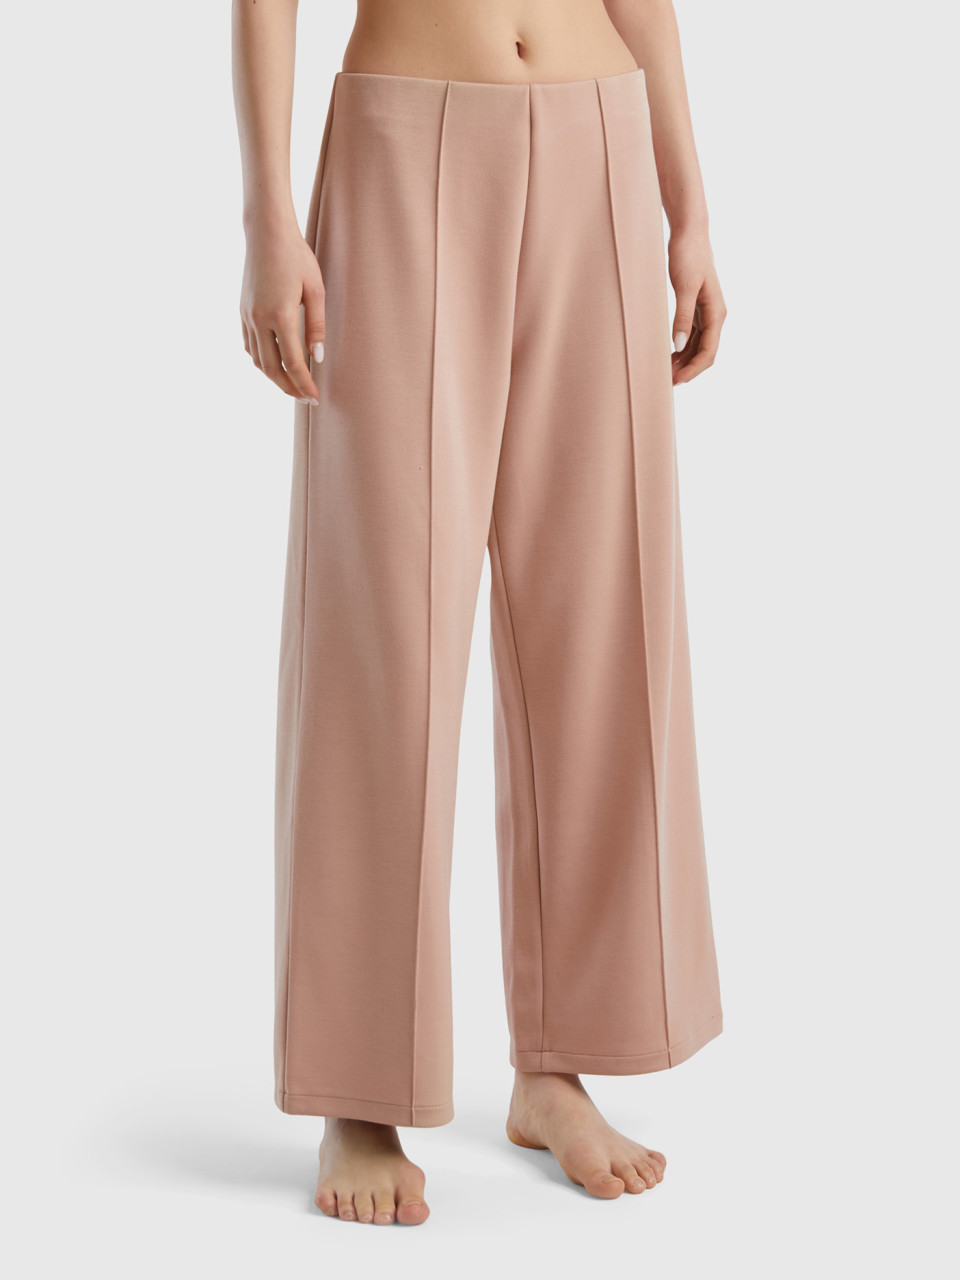 Benetton, High-waisted Palazzo Trousers, Beige, Women